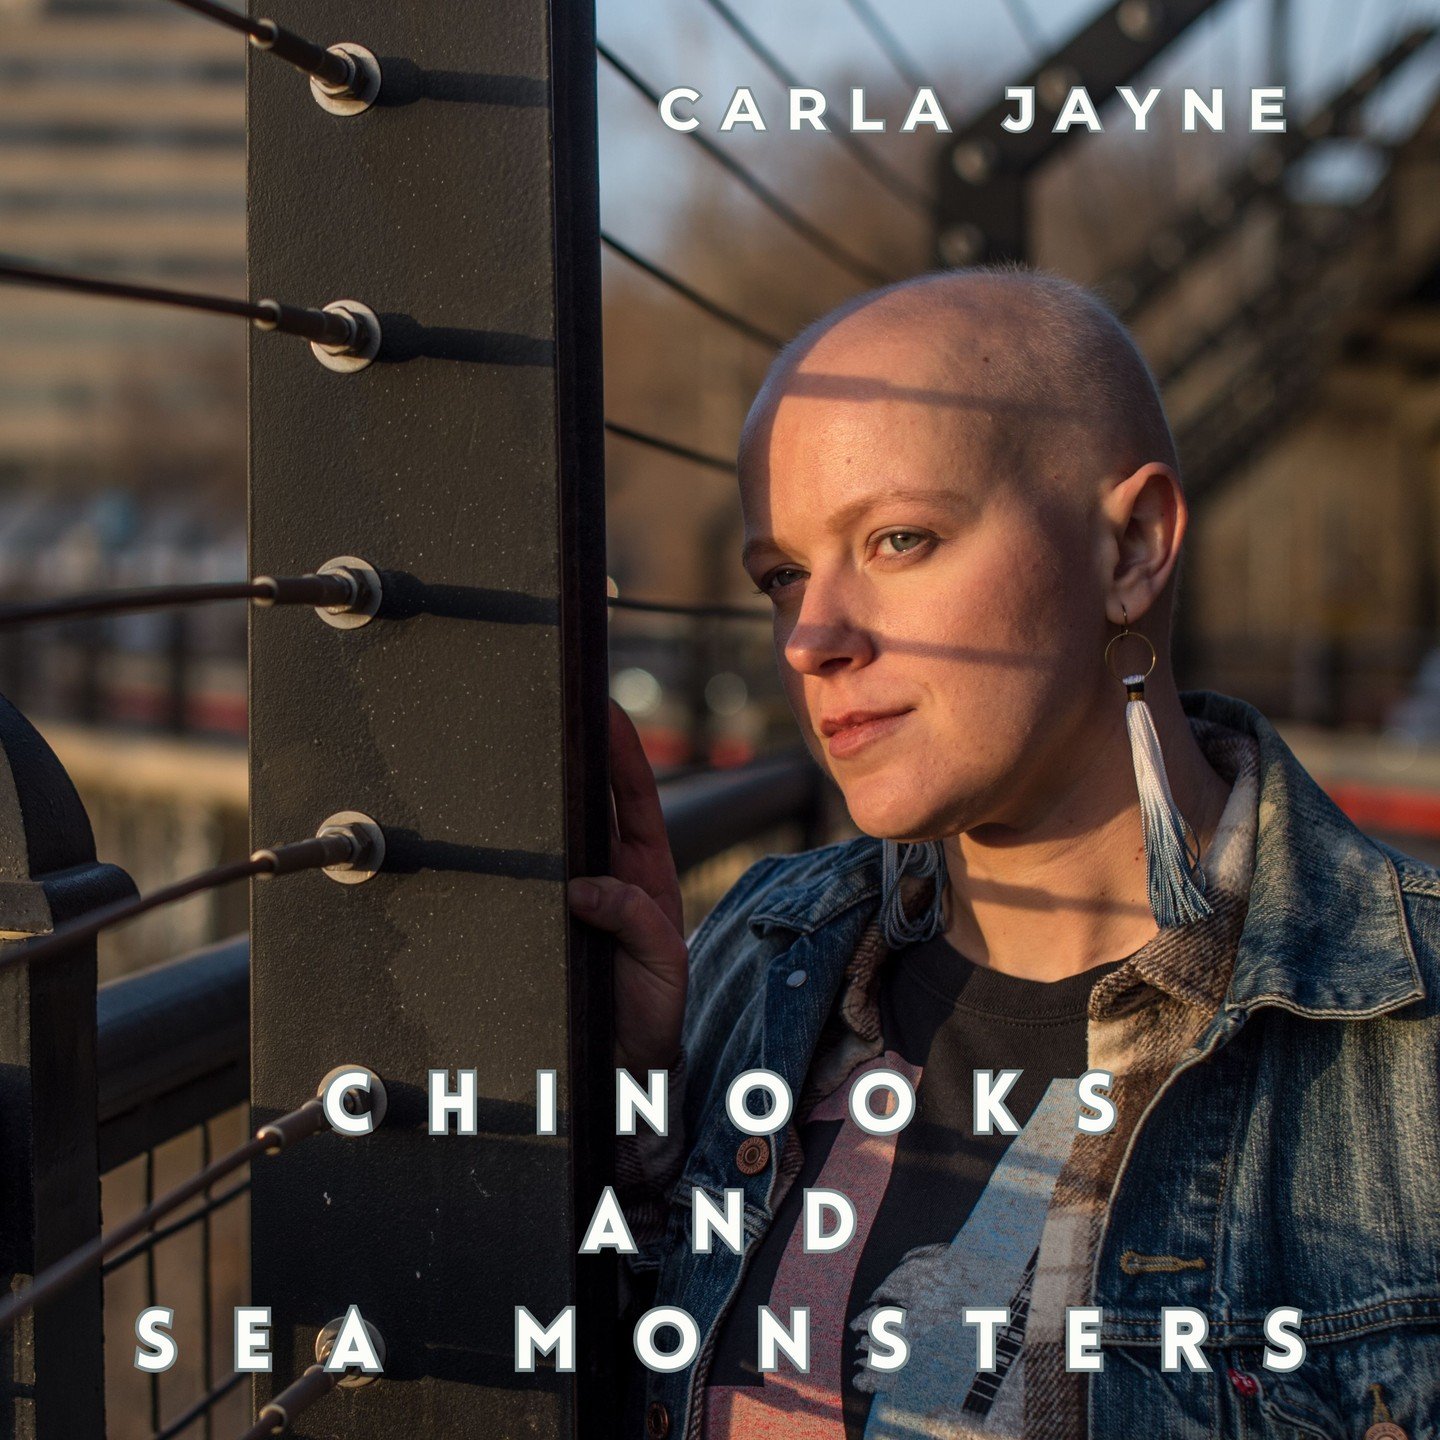 It's actually happening. My first body of music is out in the world!

The songs on Chinooks and Sea Monsters came from a time in my life when I questioned where I wanted to be in the world. I loved the place I come from, but didn't feel like I belong